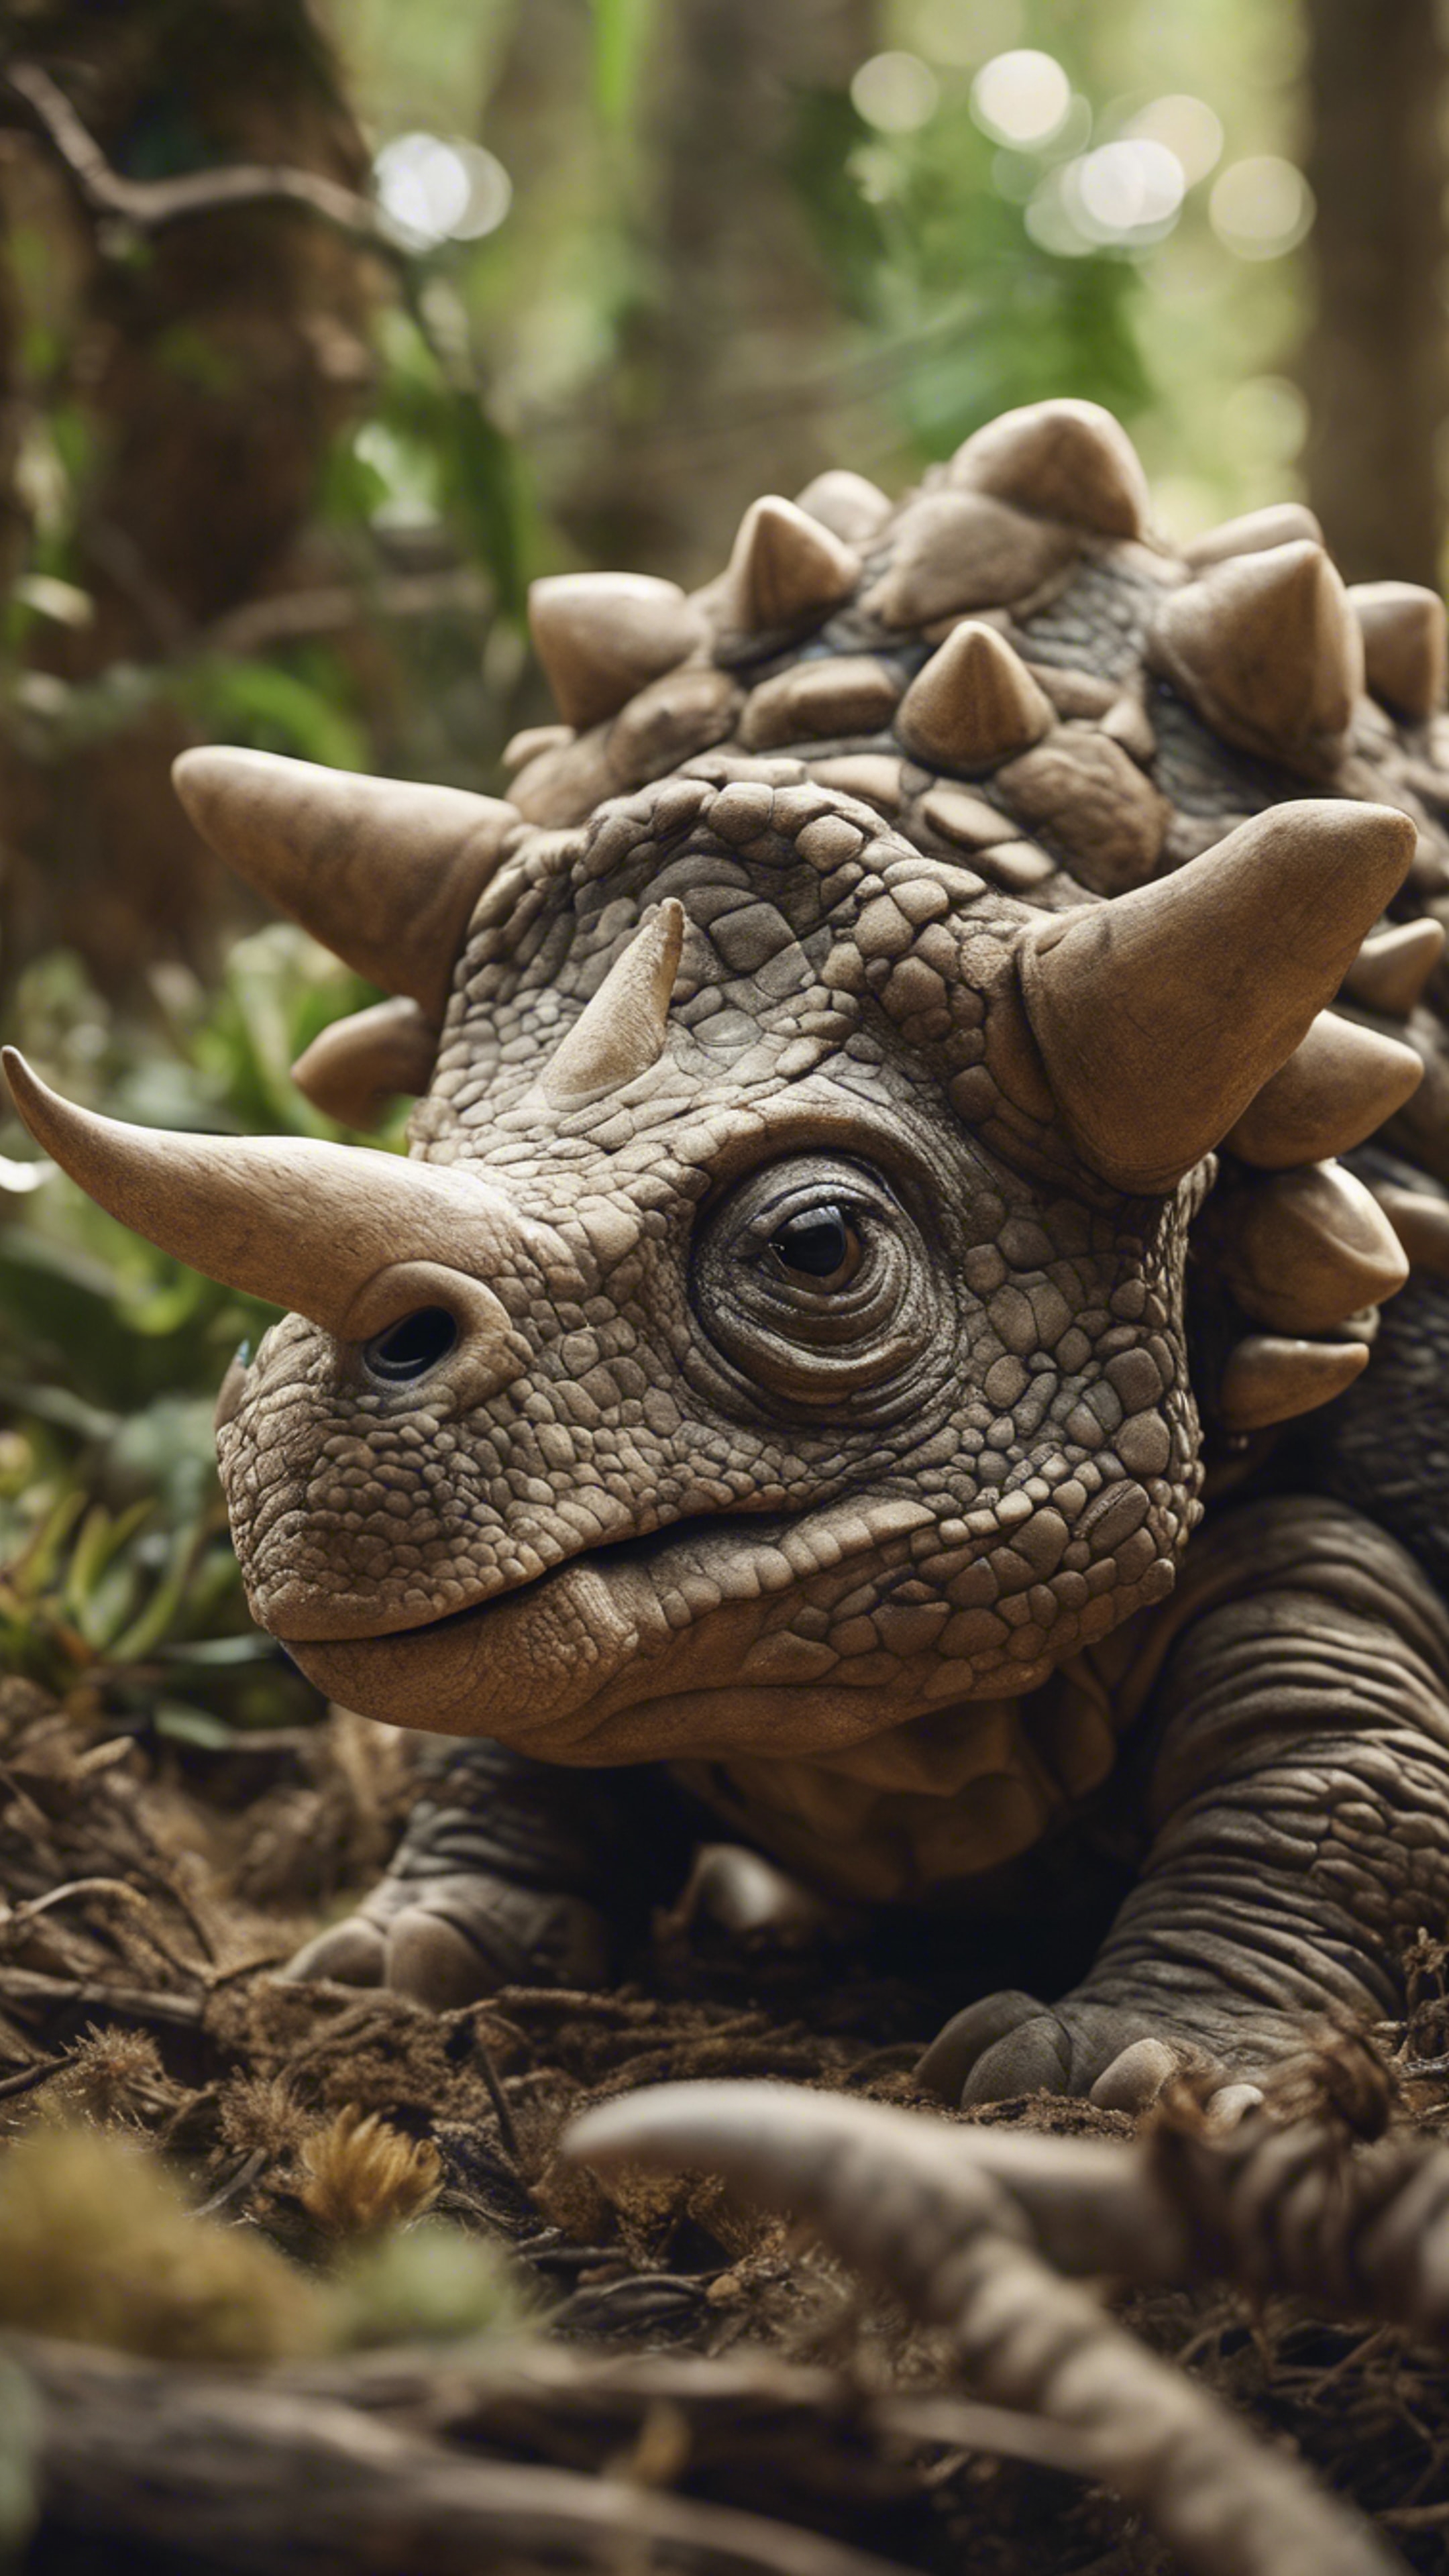 A nest full of baby Triceratops sleeping peacefully under the watchful eyes of their mother. Wallpaper[9d947d640cf64dc3ba13]